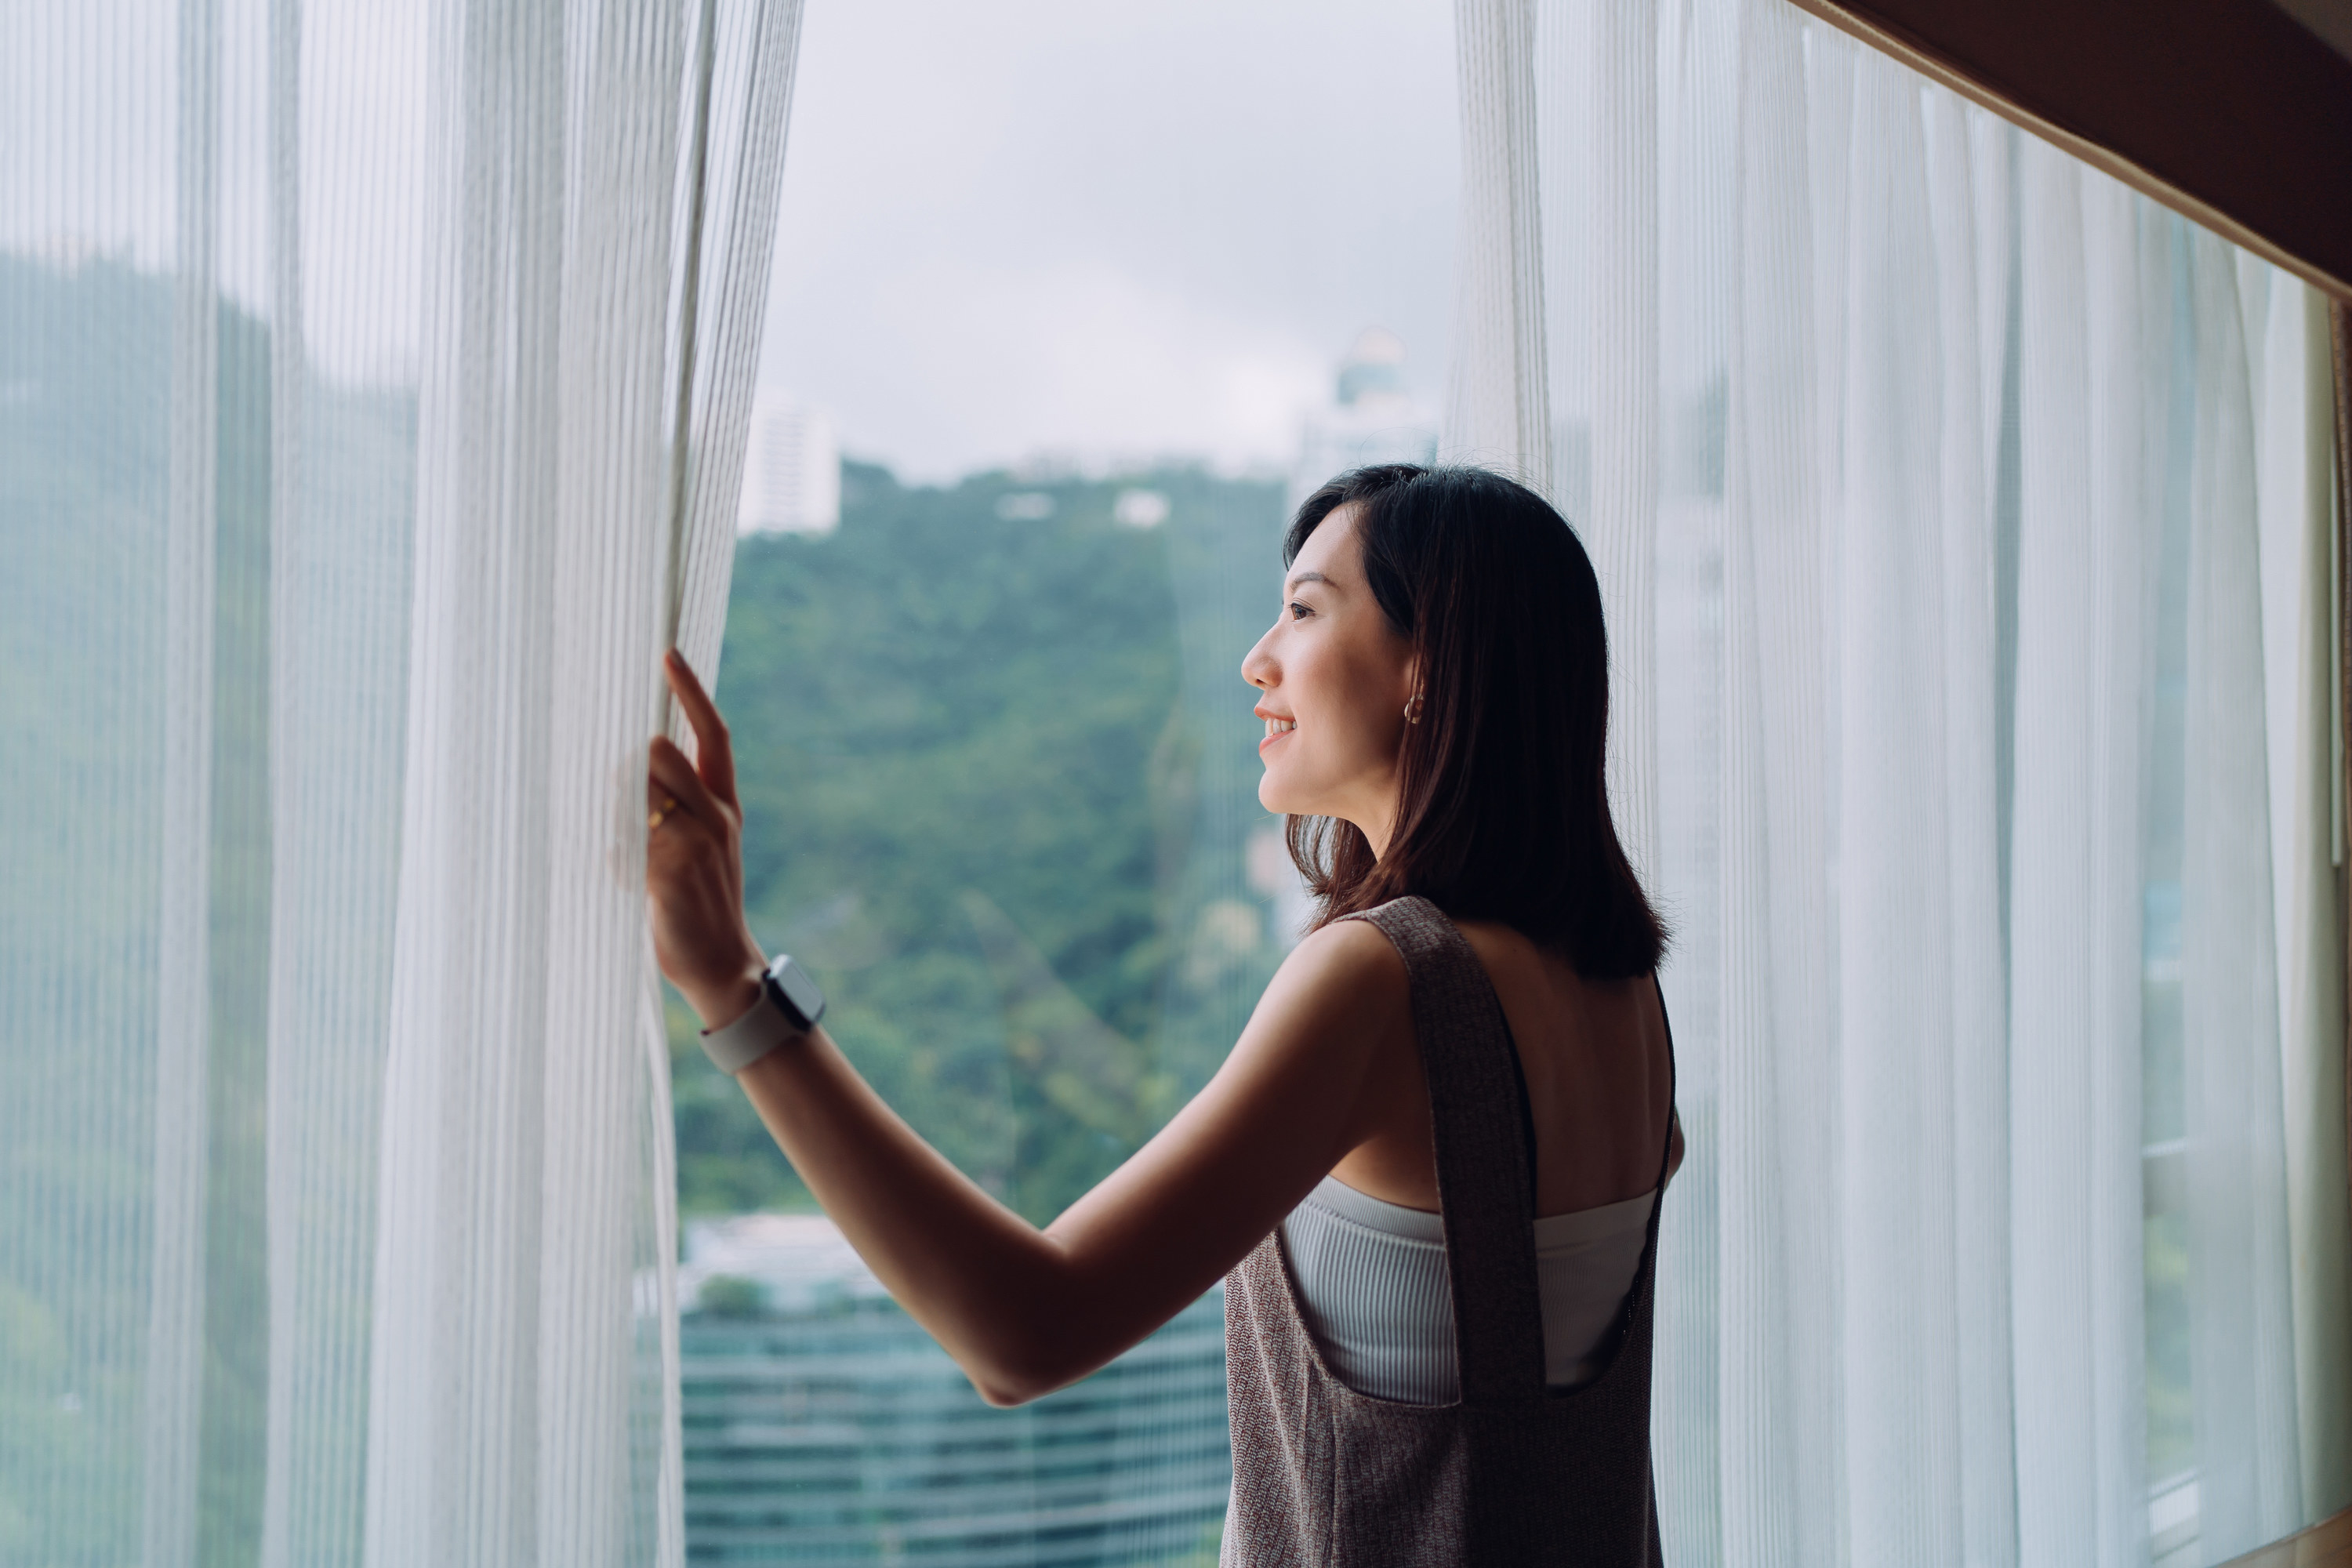 An Asian woman looking at a window